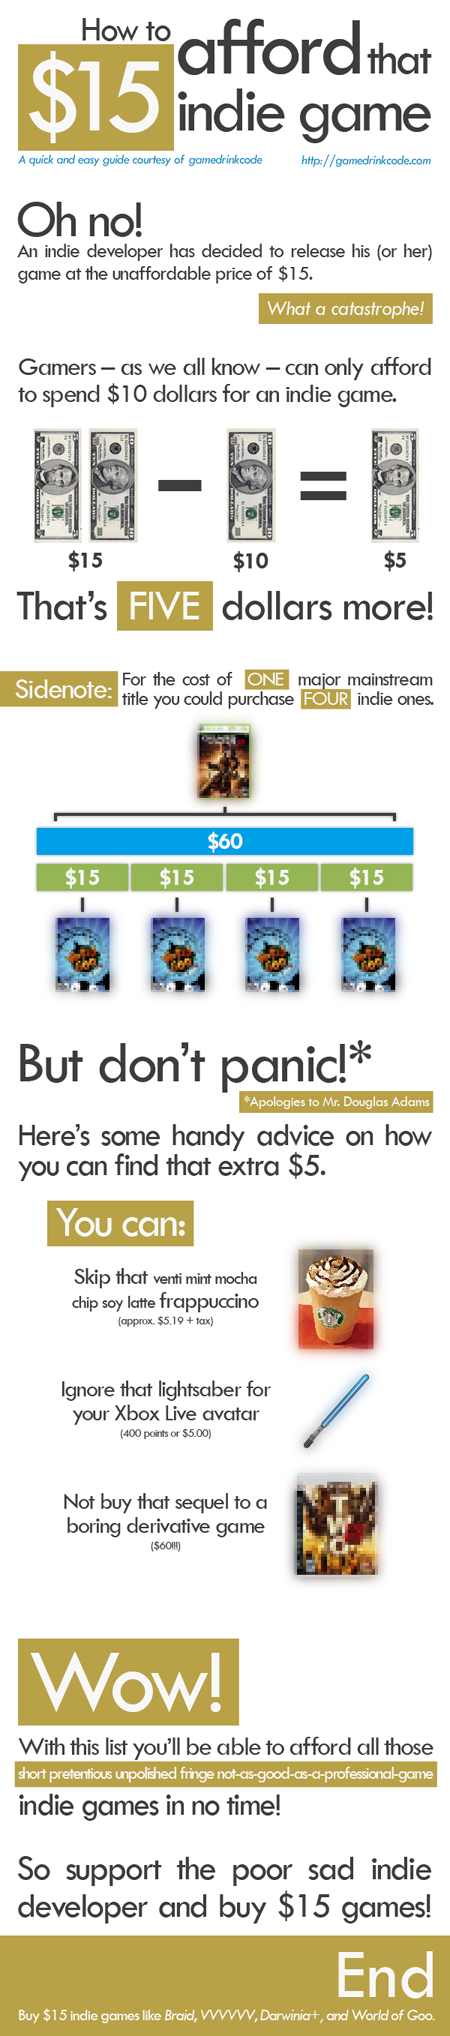 How to afford that $15 indie game (by Gamedrinkcode)